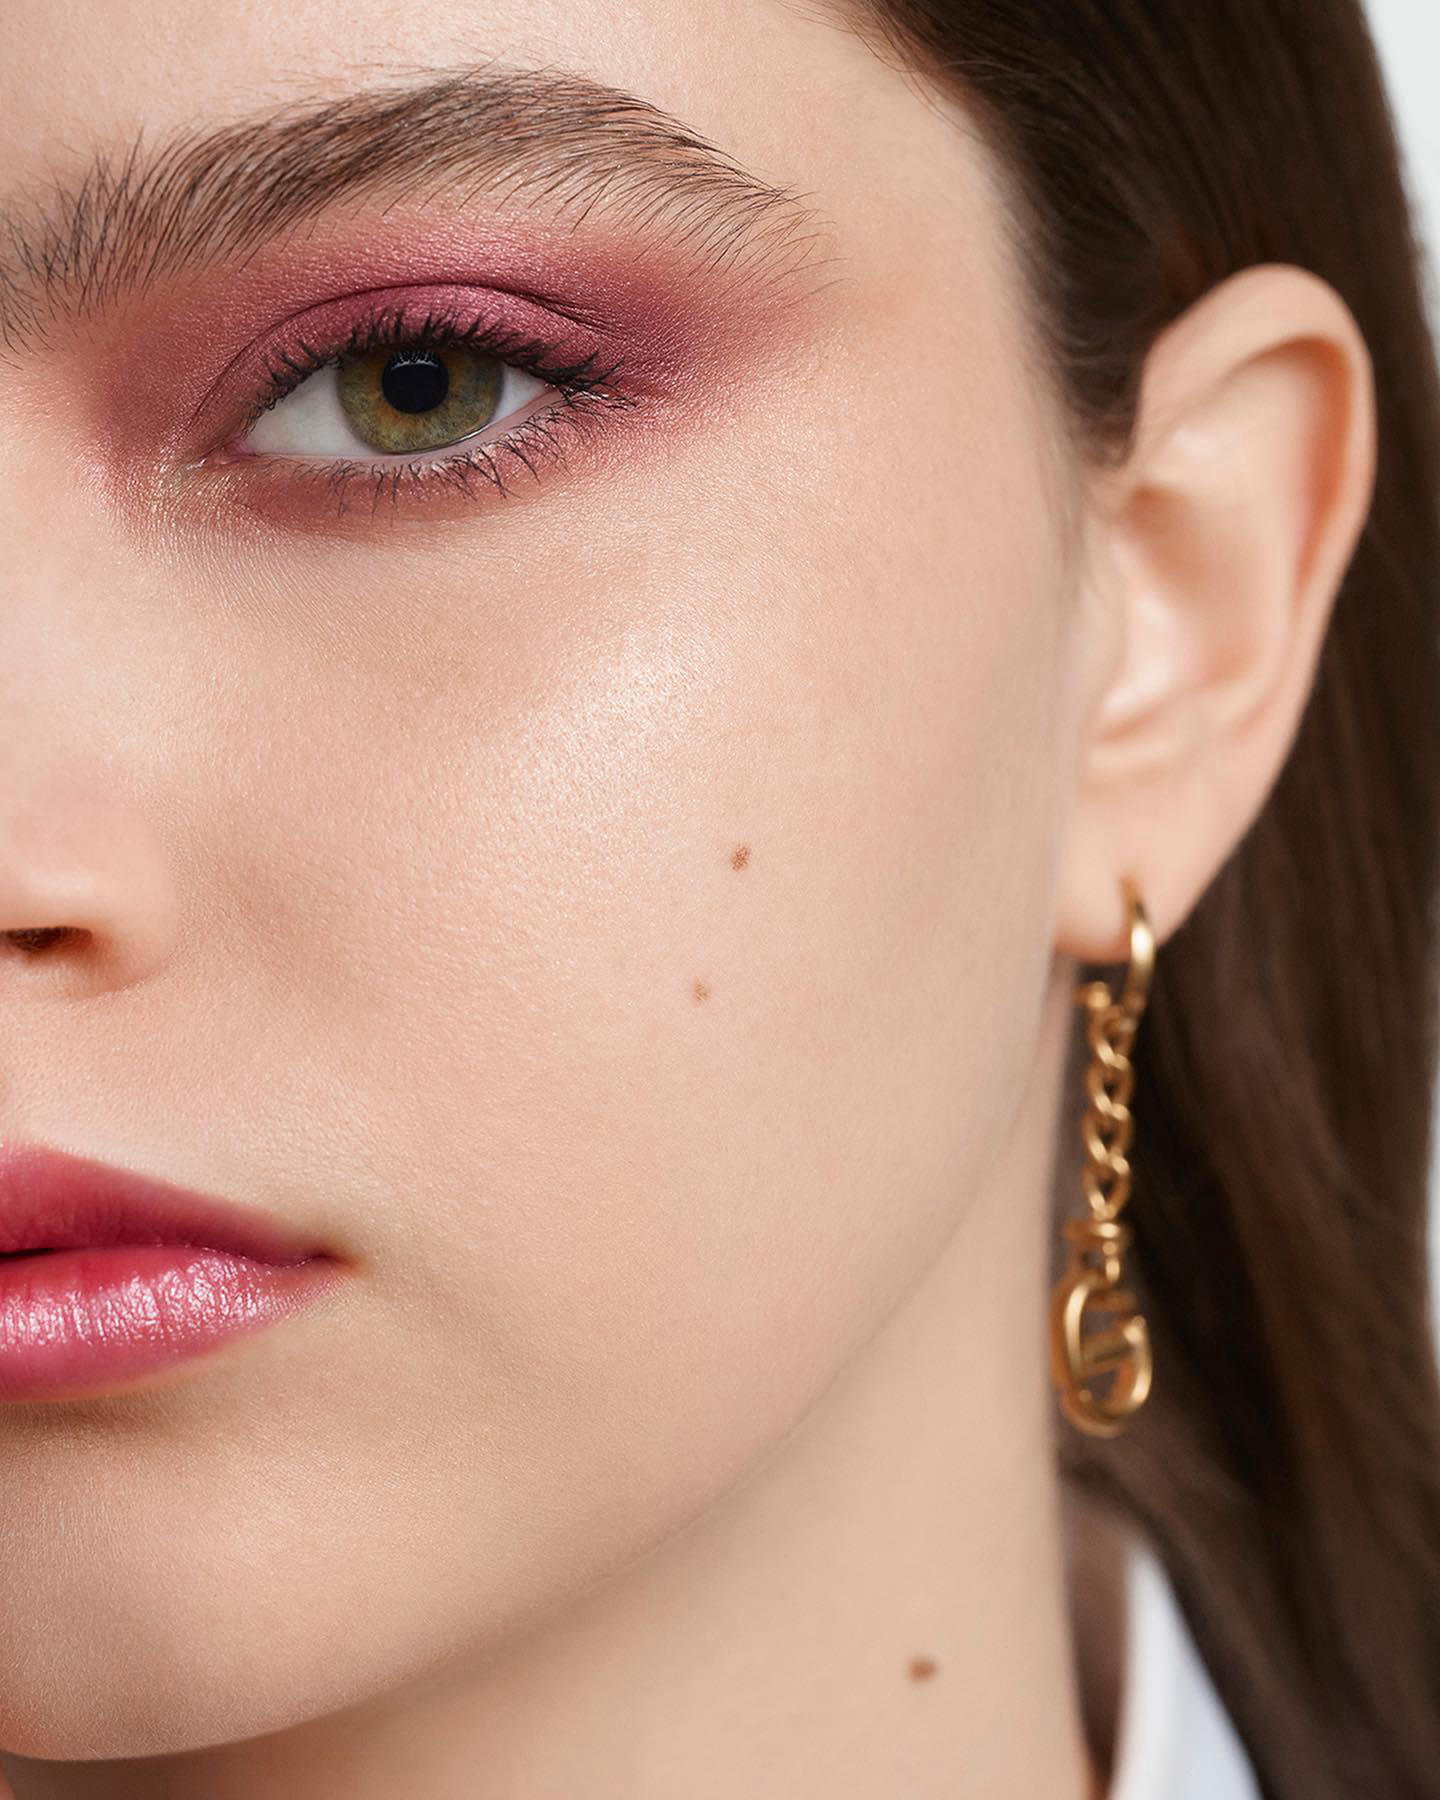 Dior Beauty Official - The new Dior Backstage holiday collection takes inspiration from the two colo